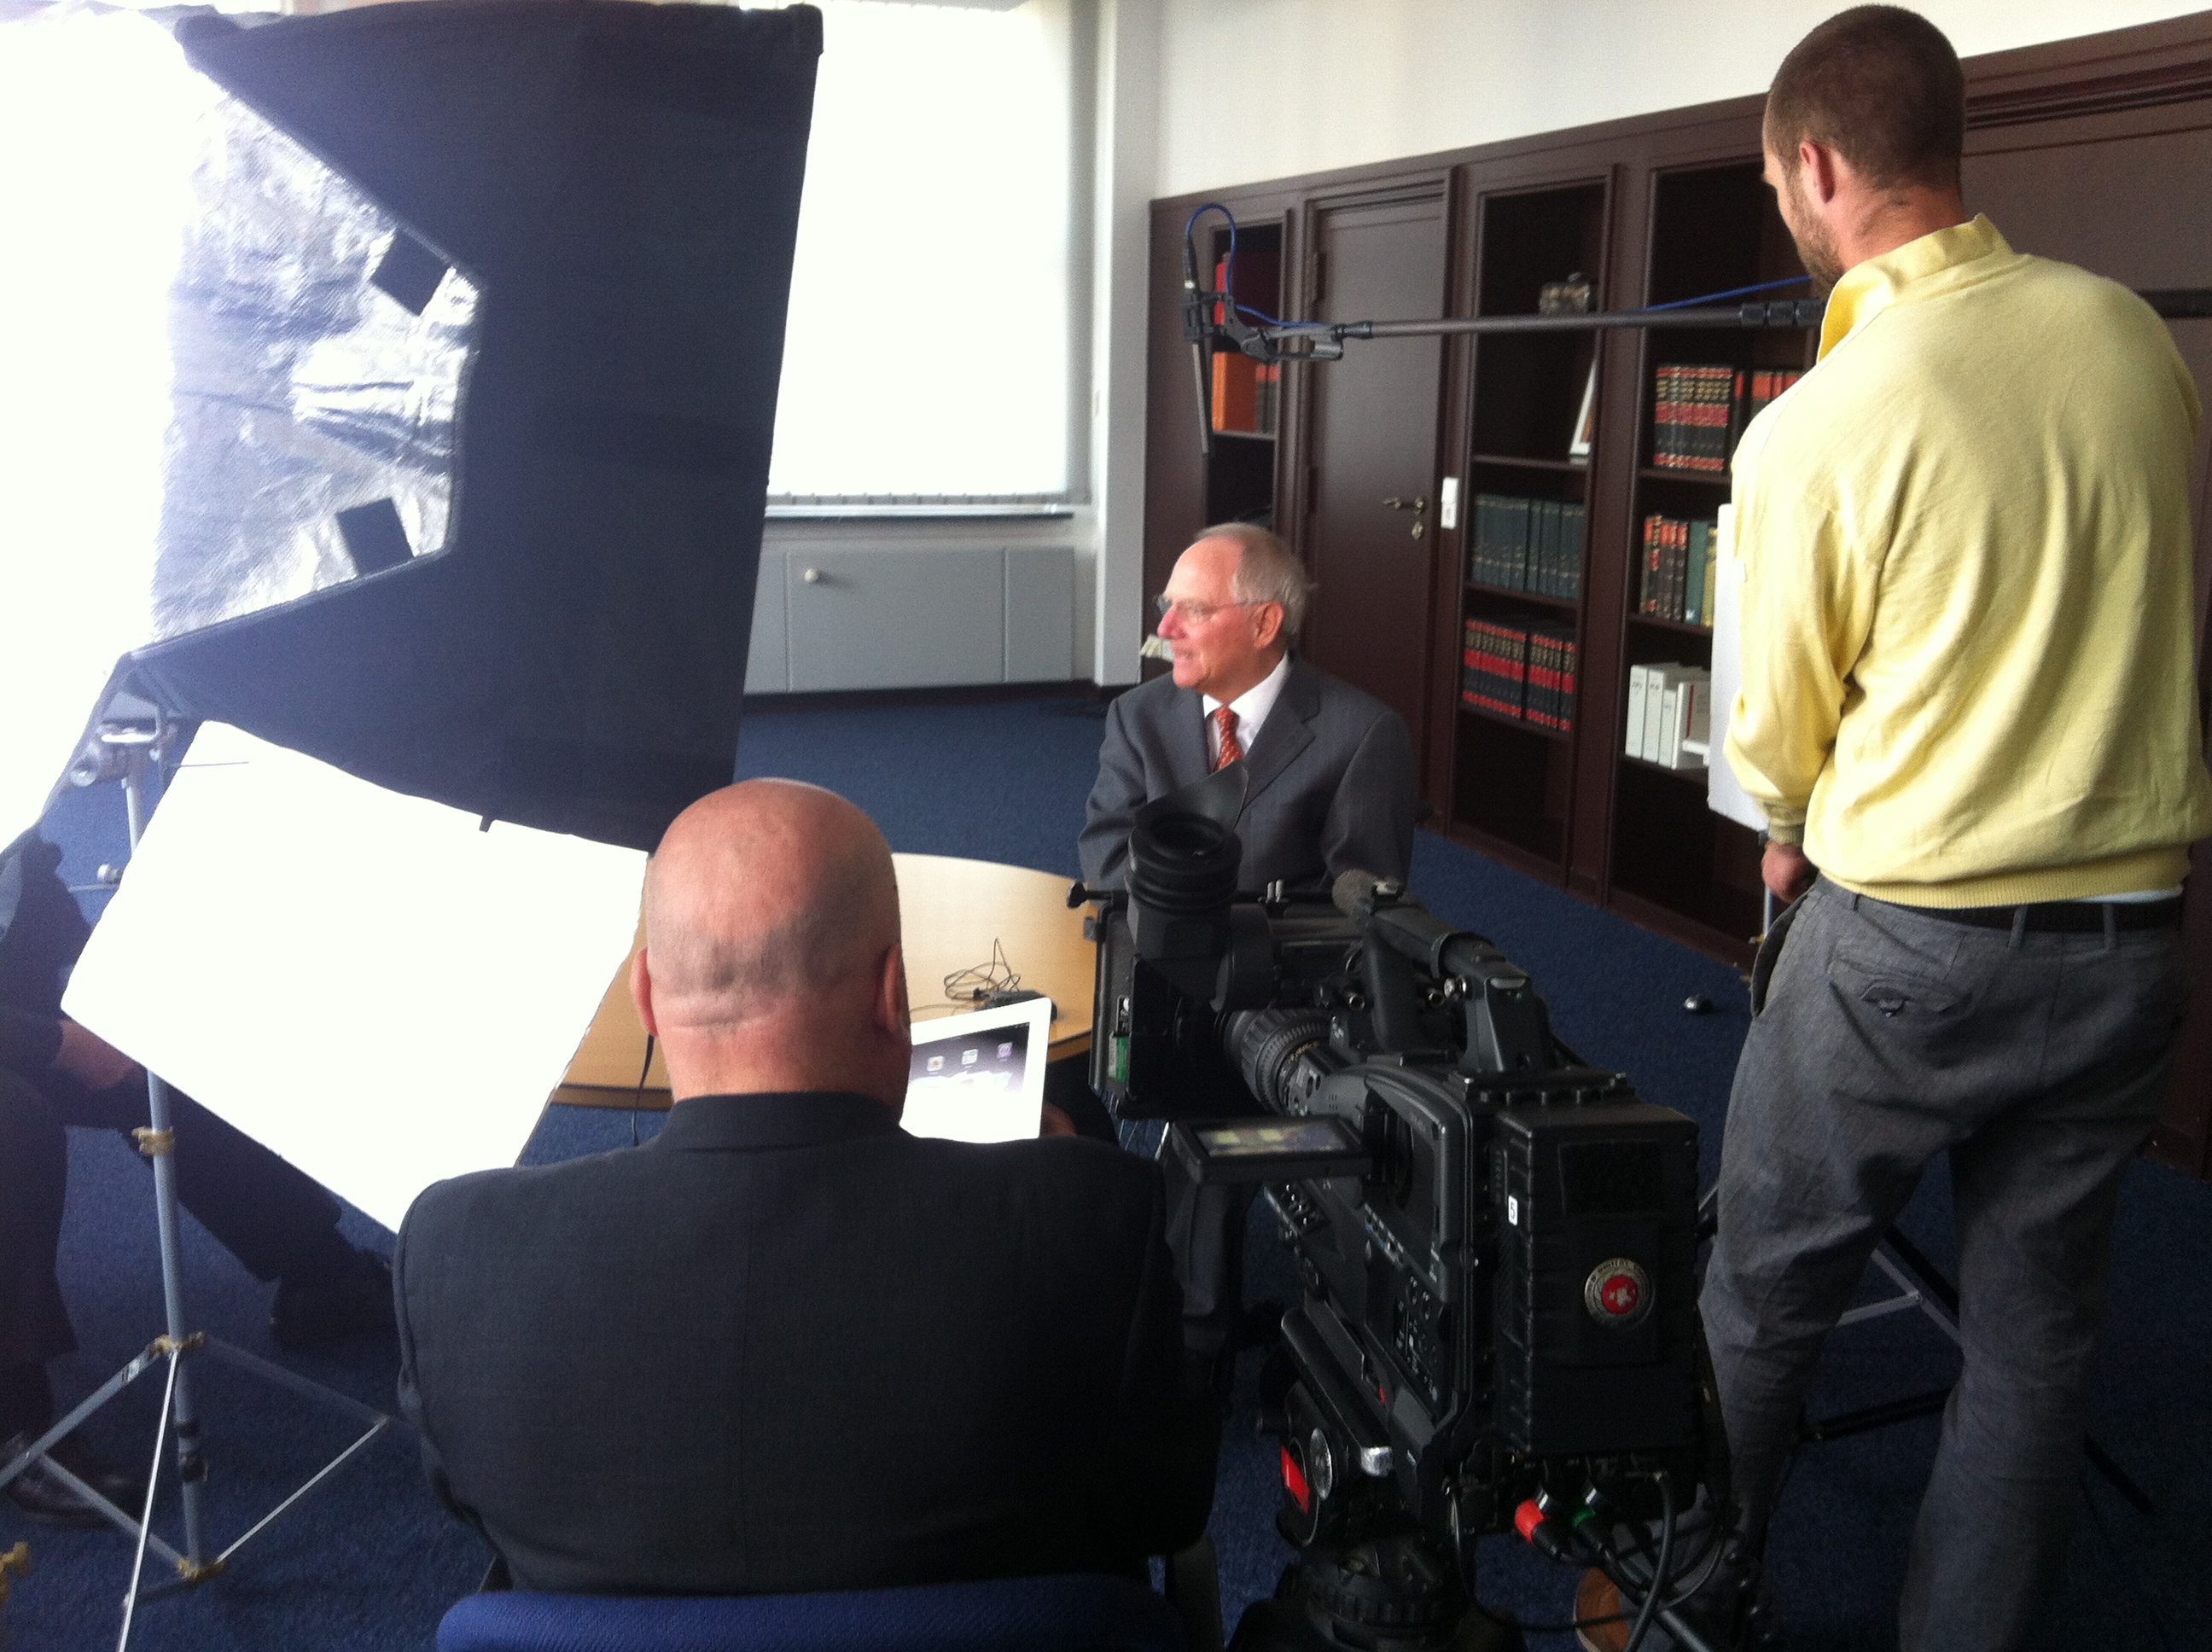 Interview with the German Finance Minister Wolfgang Schäuble for a big ARTE documentary series about Capitalism by director Ilan Ziv.